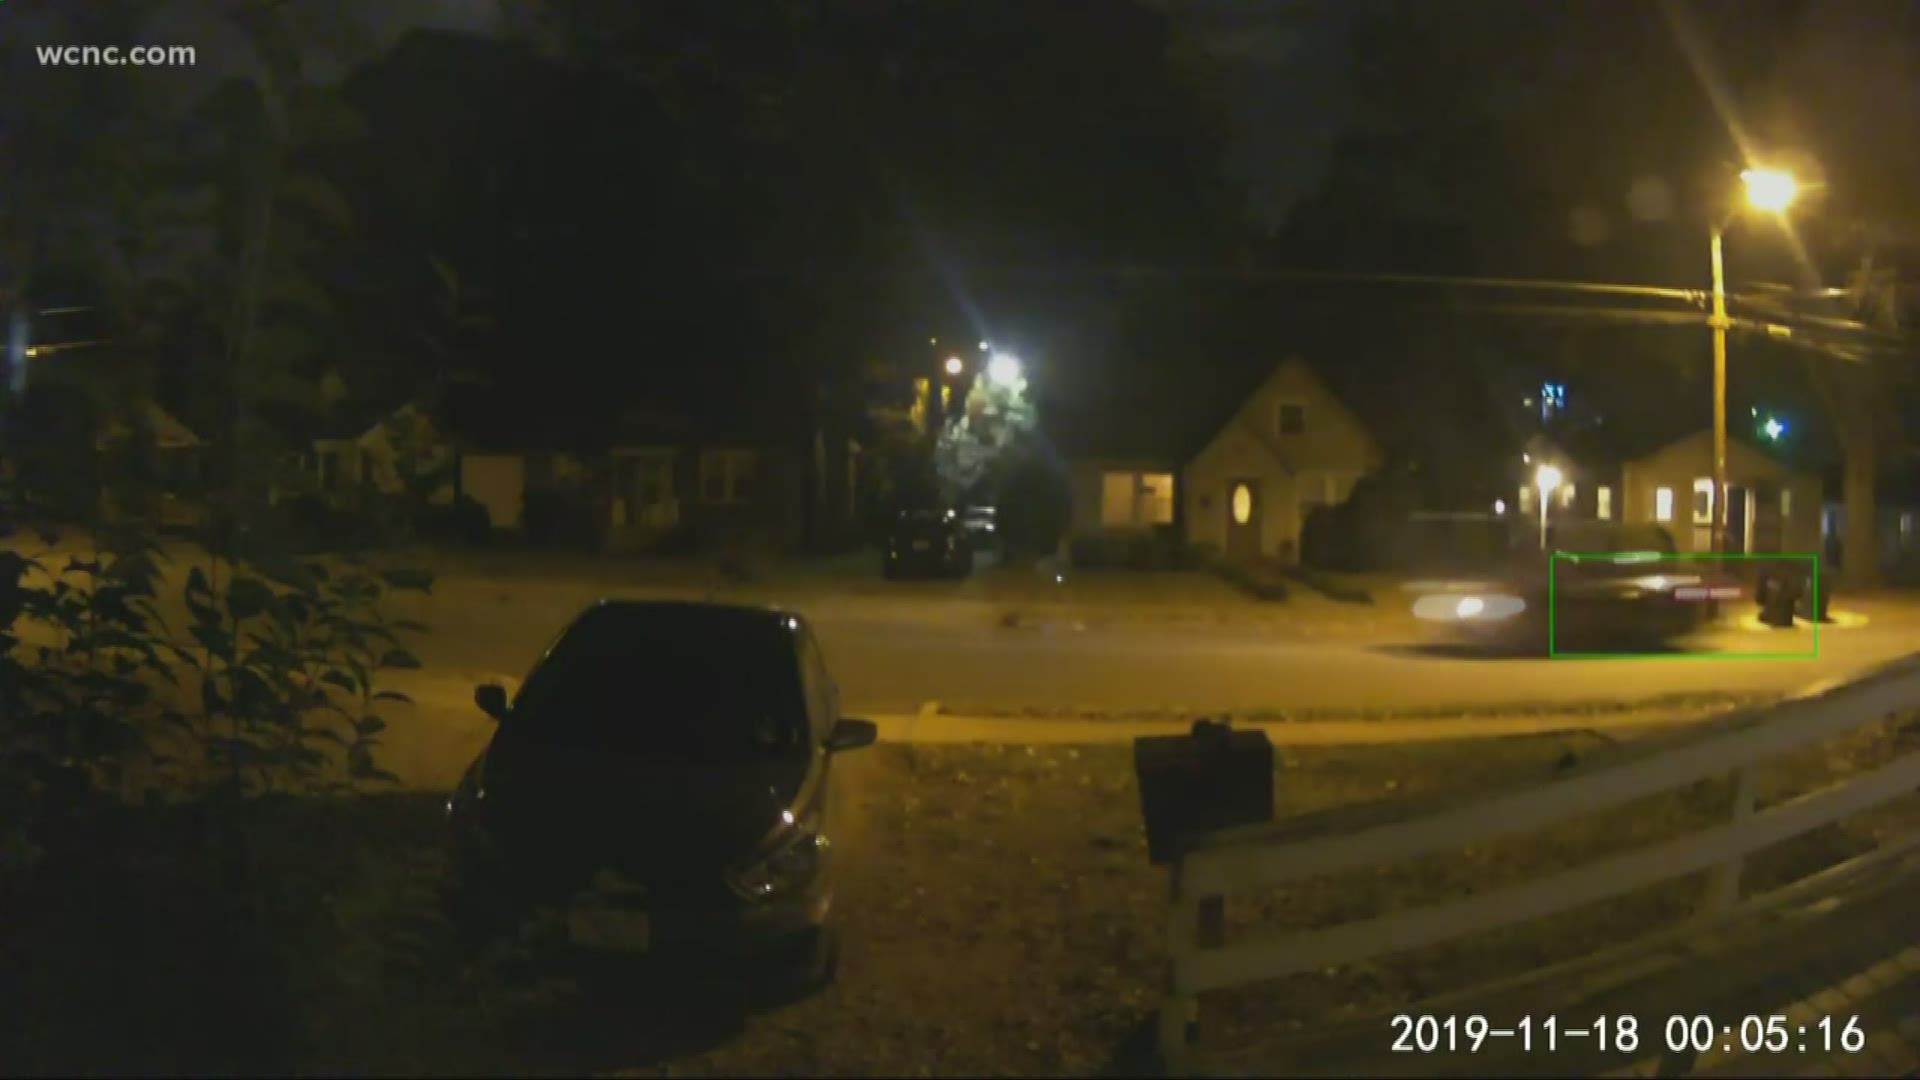 In the video, caught on a nearby doorbell camera, you can distinctly hear two loud bangs.